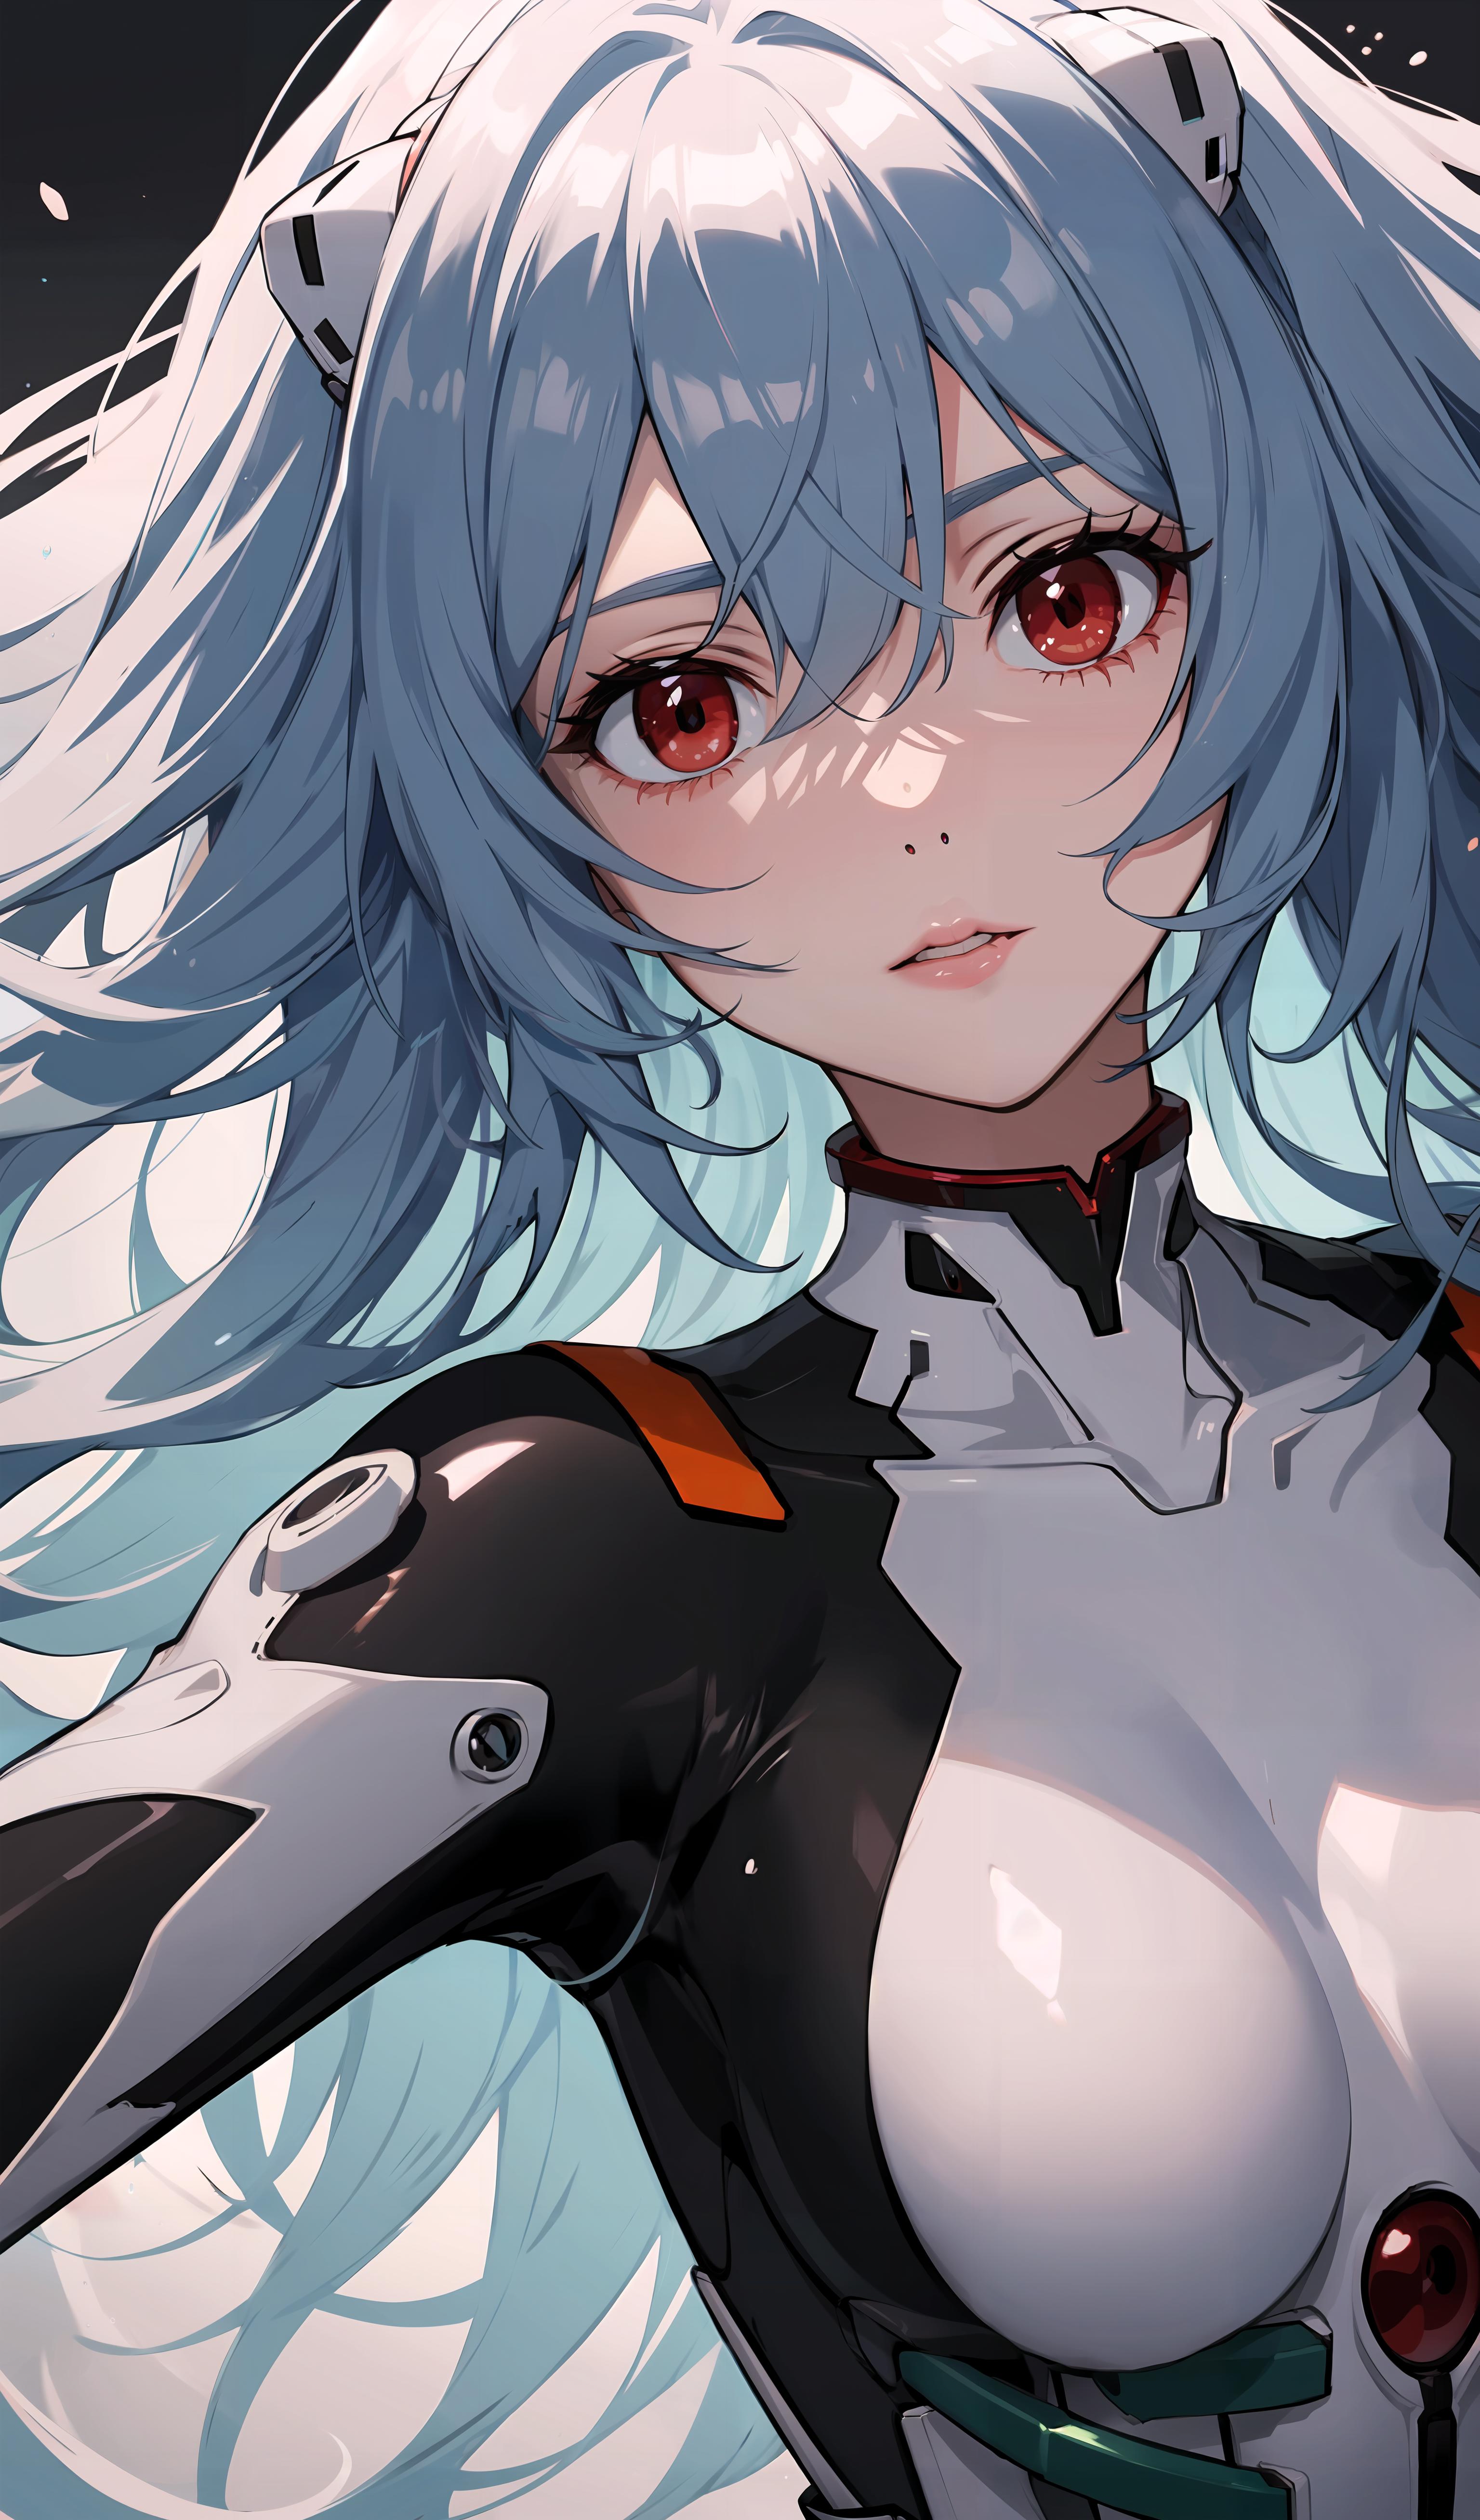 A beautiful blue haired woman in a black and white outfit with red eyes.